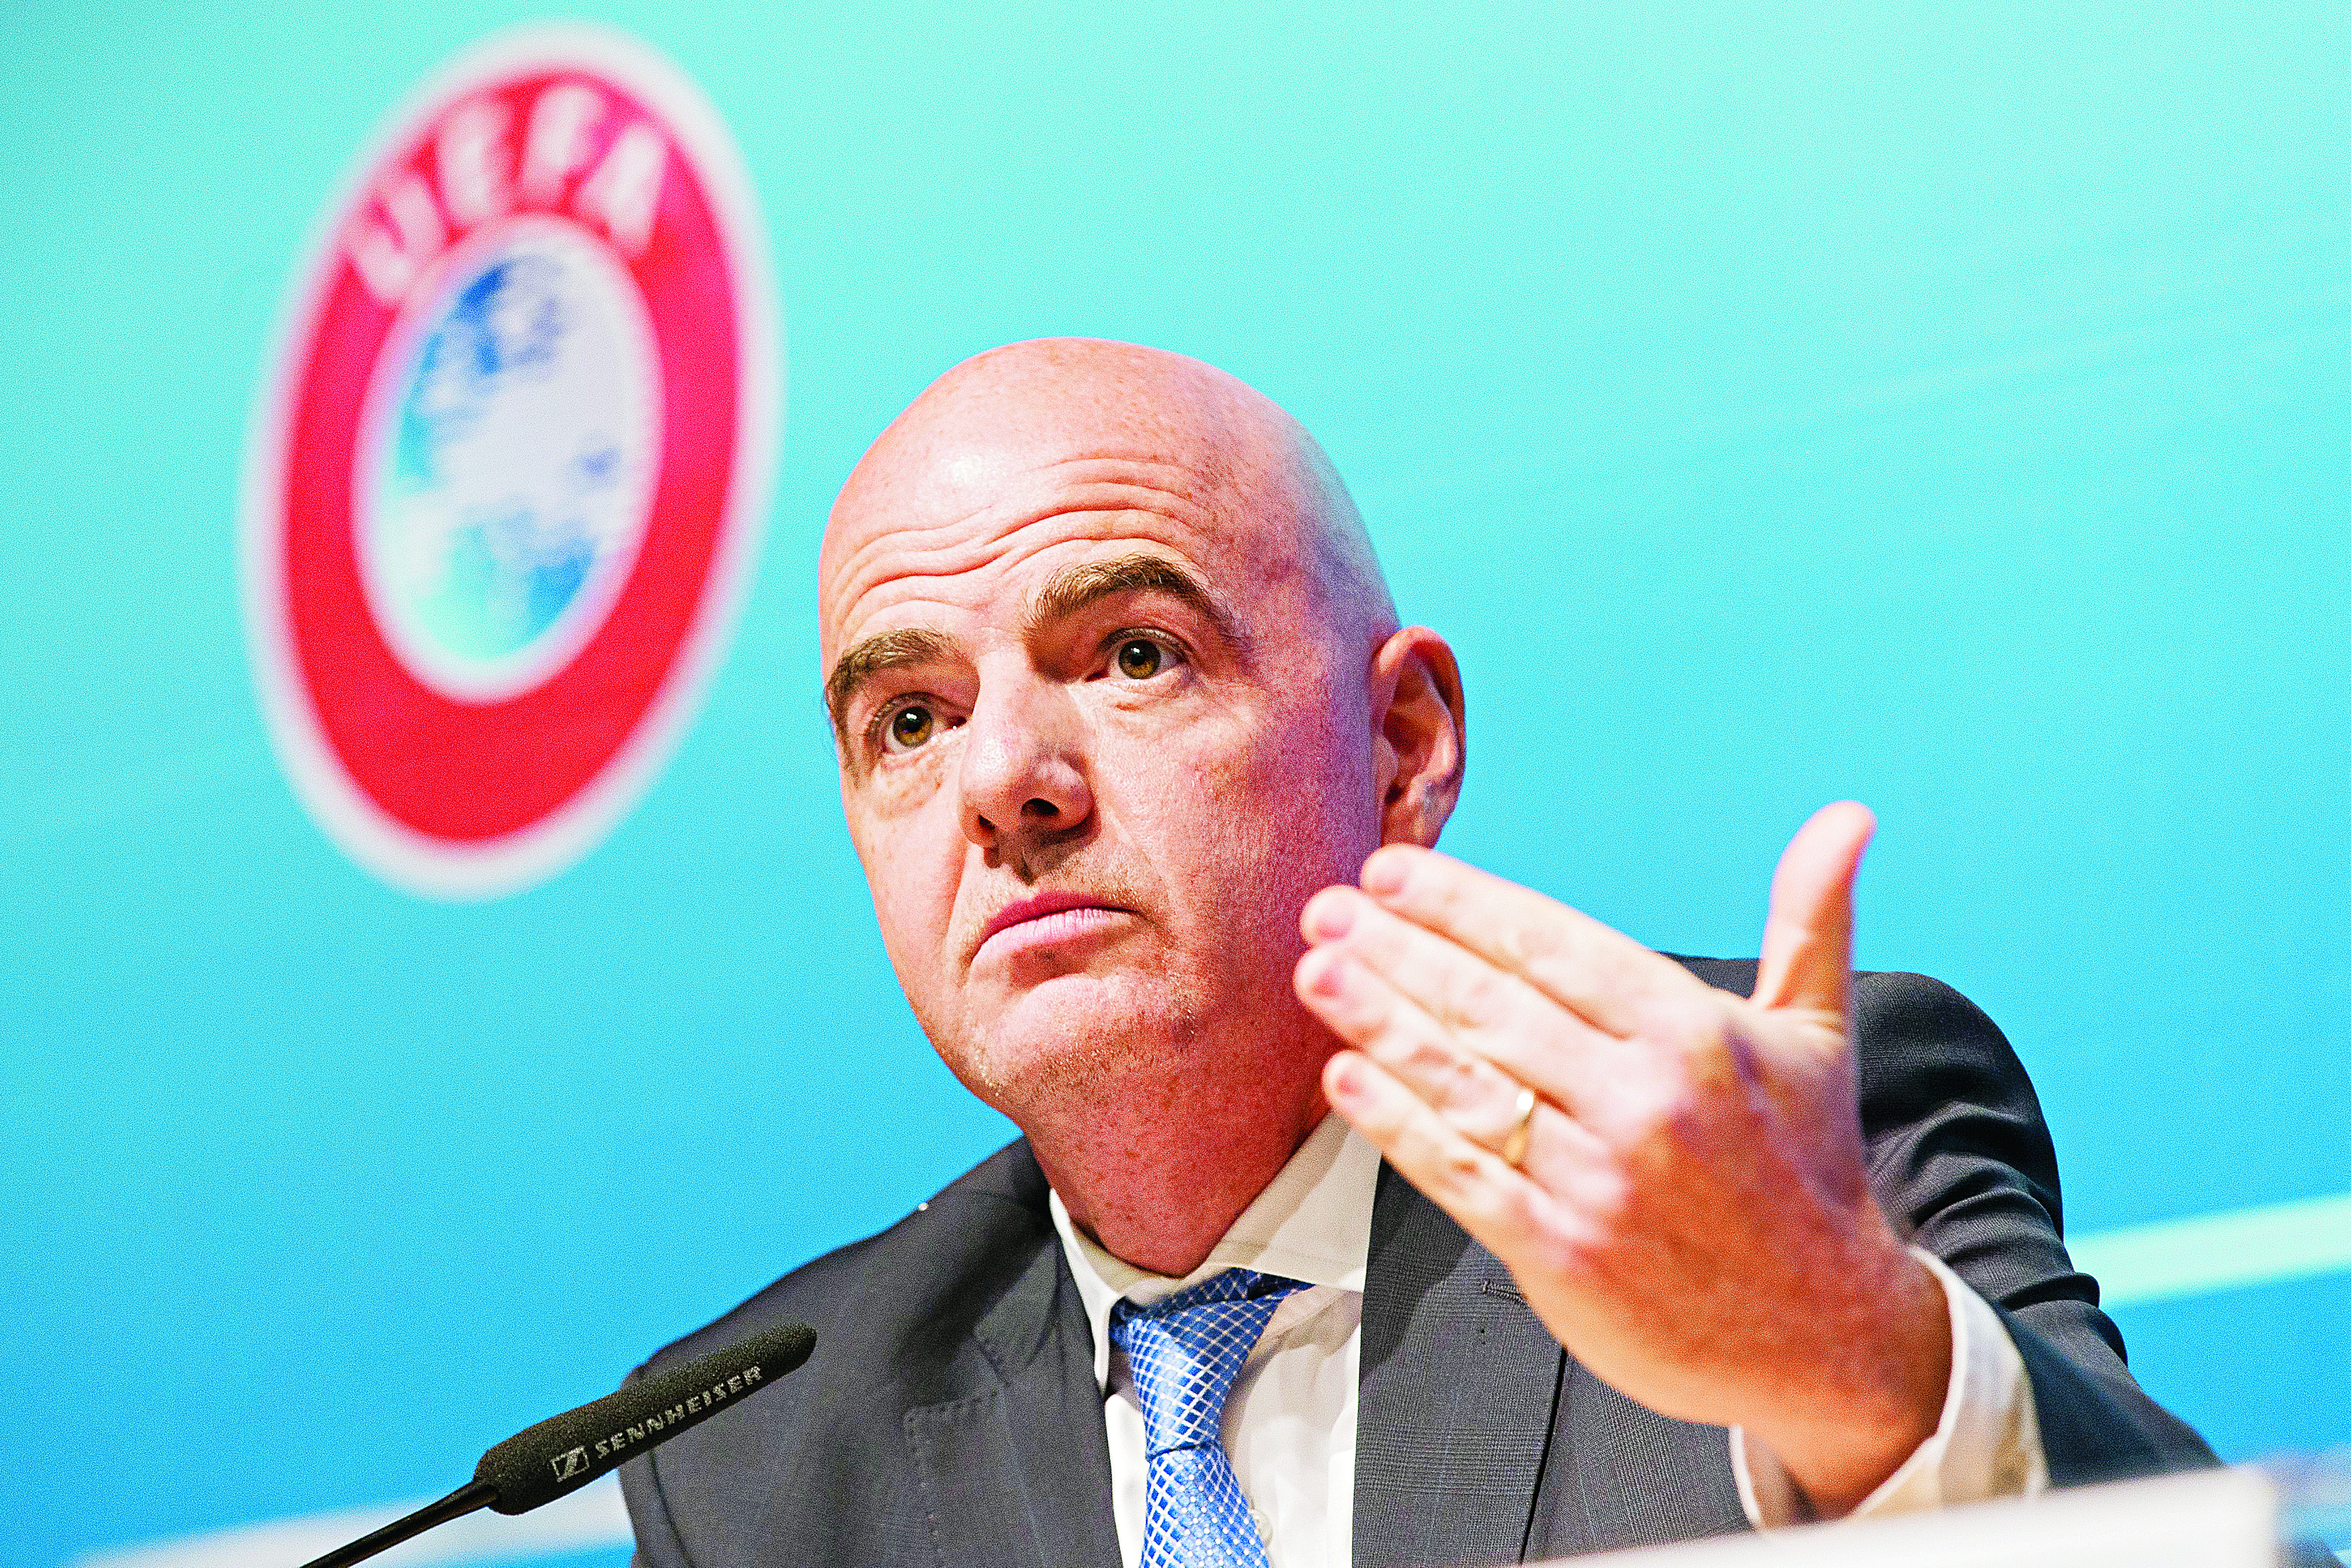 epa05118837 UEFA General Secretary and FIFA president candidate Gianni Infantino speaks during a press conference at the UEFA Headquarters in Nyon, Switzerland, 22 January 2016. The UEFA Executive Committee endorses unanimously Gianni Infantino for the FIFA presidency. EPA/CYRIL ZINGARO